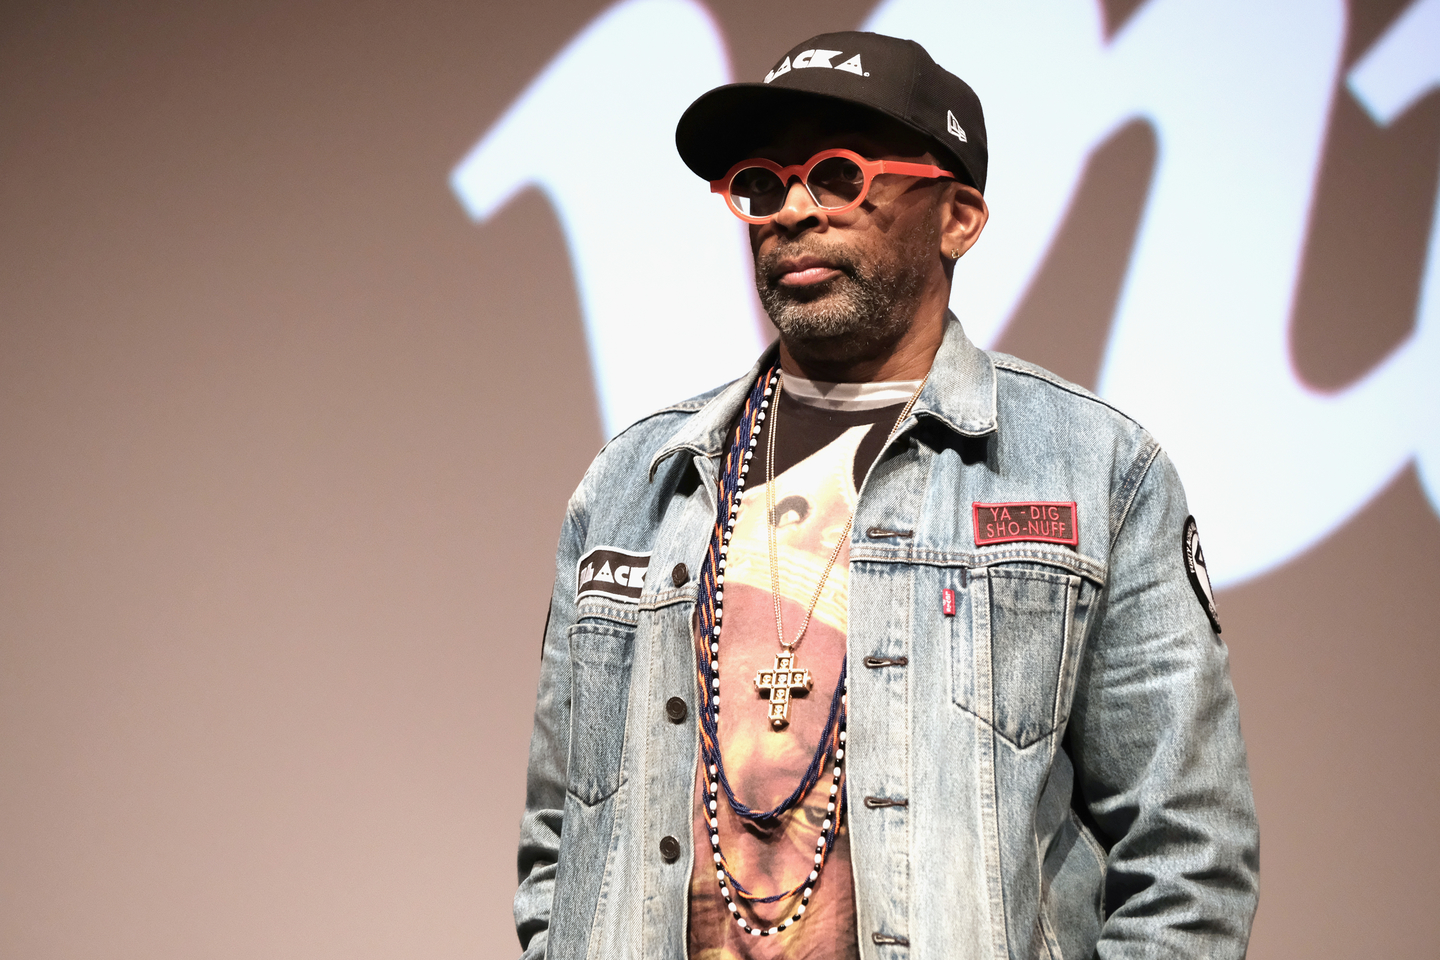 Spike Lee speaks onstage at “Spike Lee Master Class: She's Gotta Have It Episode 10.” Photo by Hubert Vestil/Getty Images for SXSW